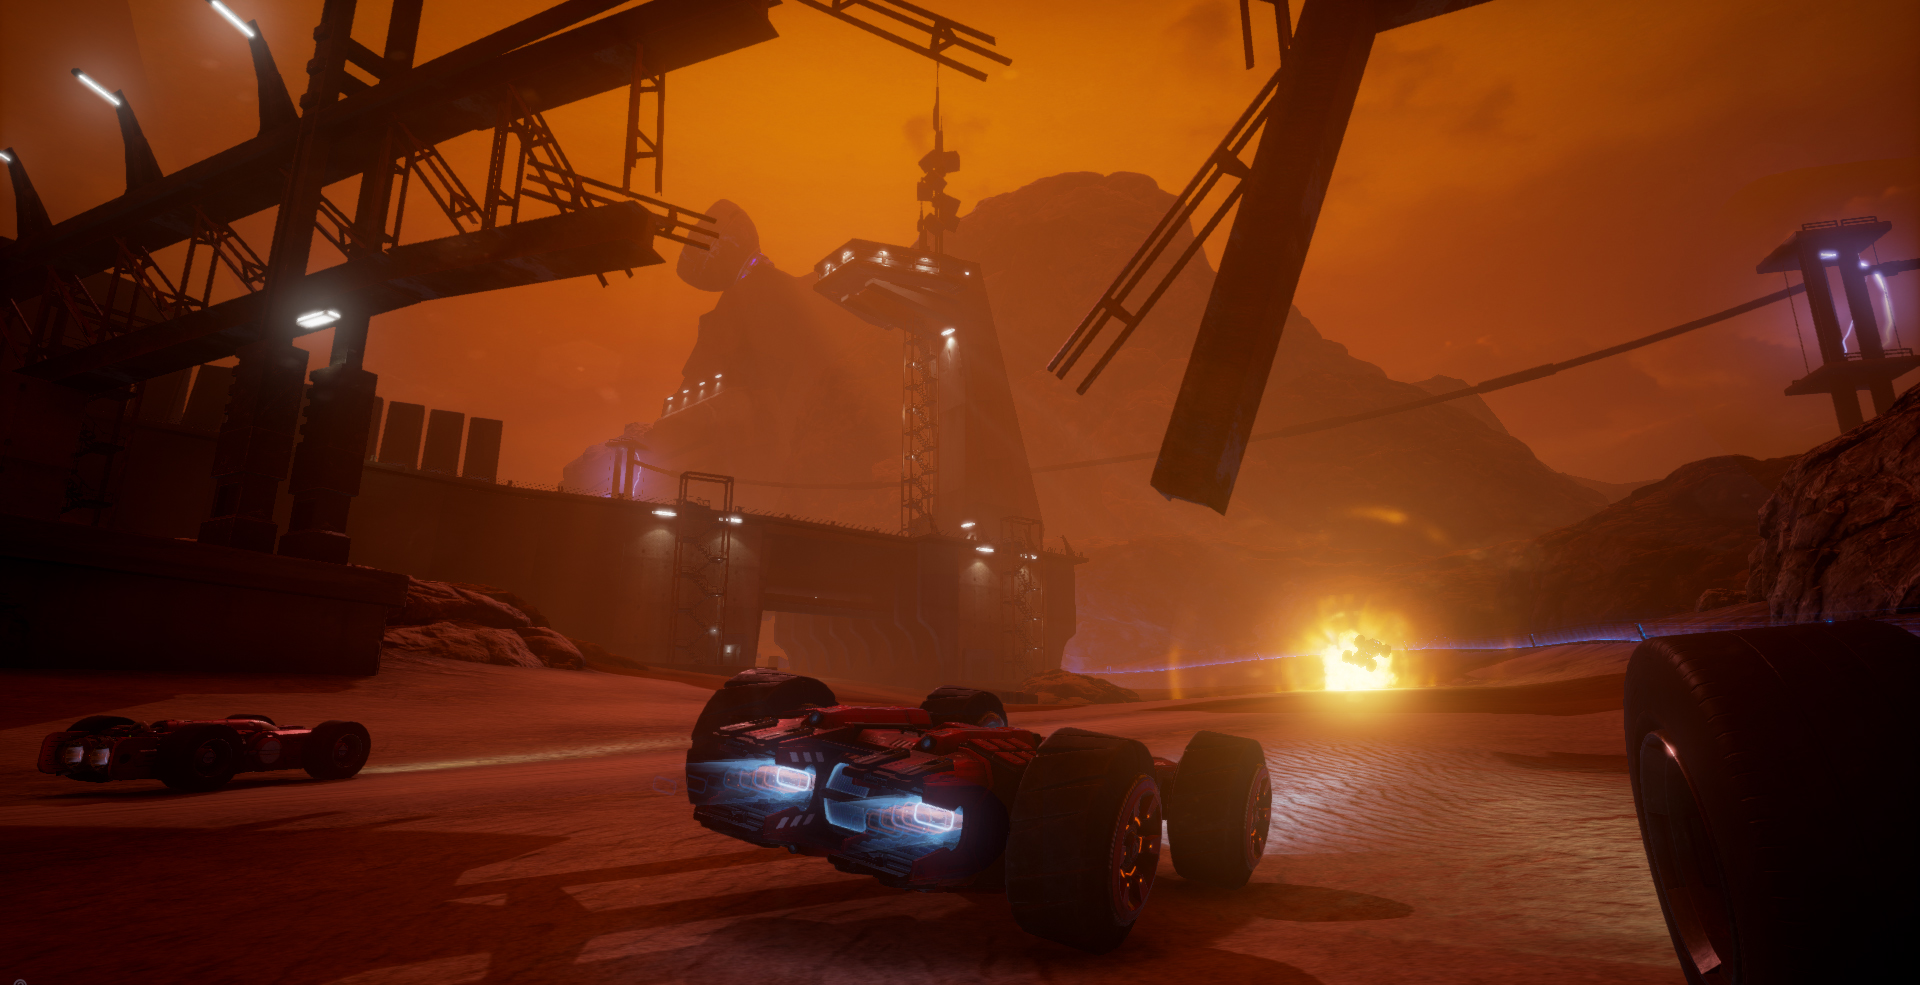 Futuristic Combat Racer GRIP Heads to PS4, Xbox One, and Switch in 2018